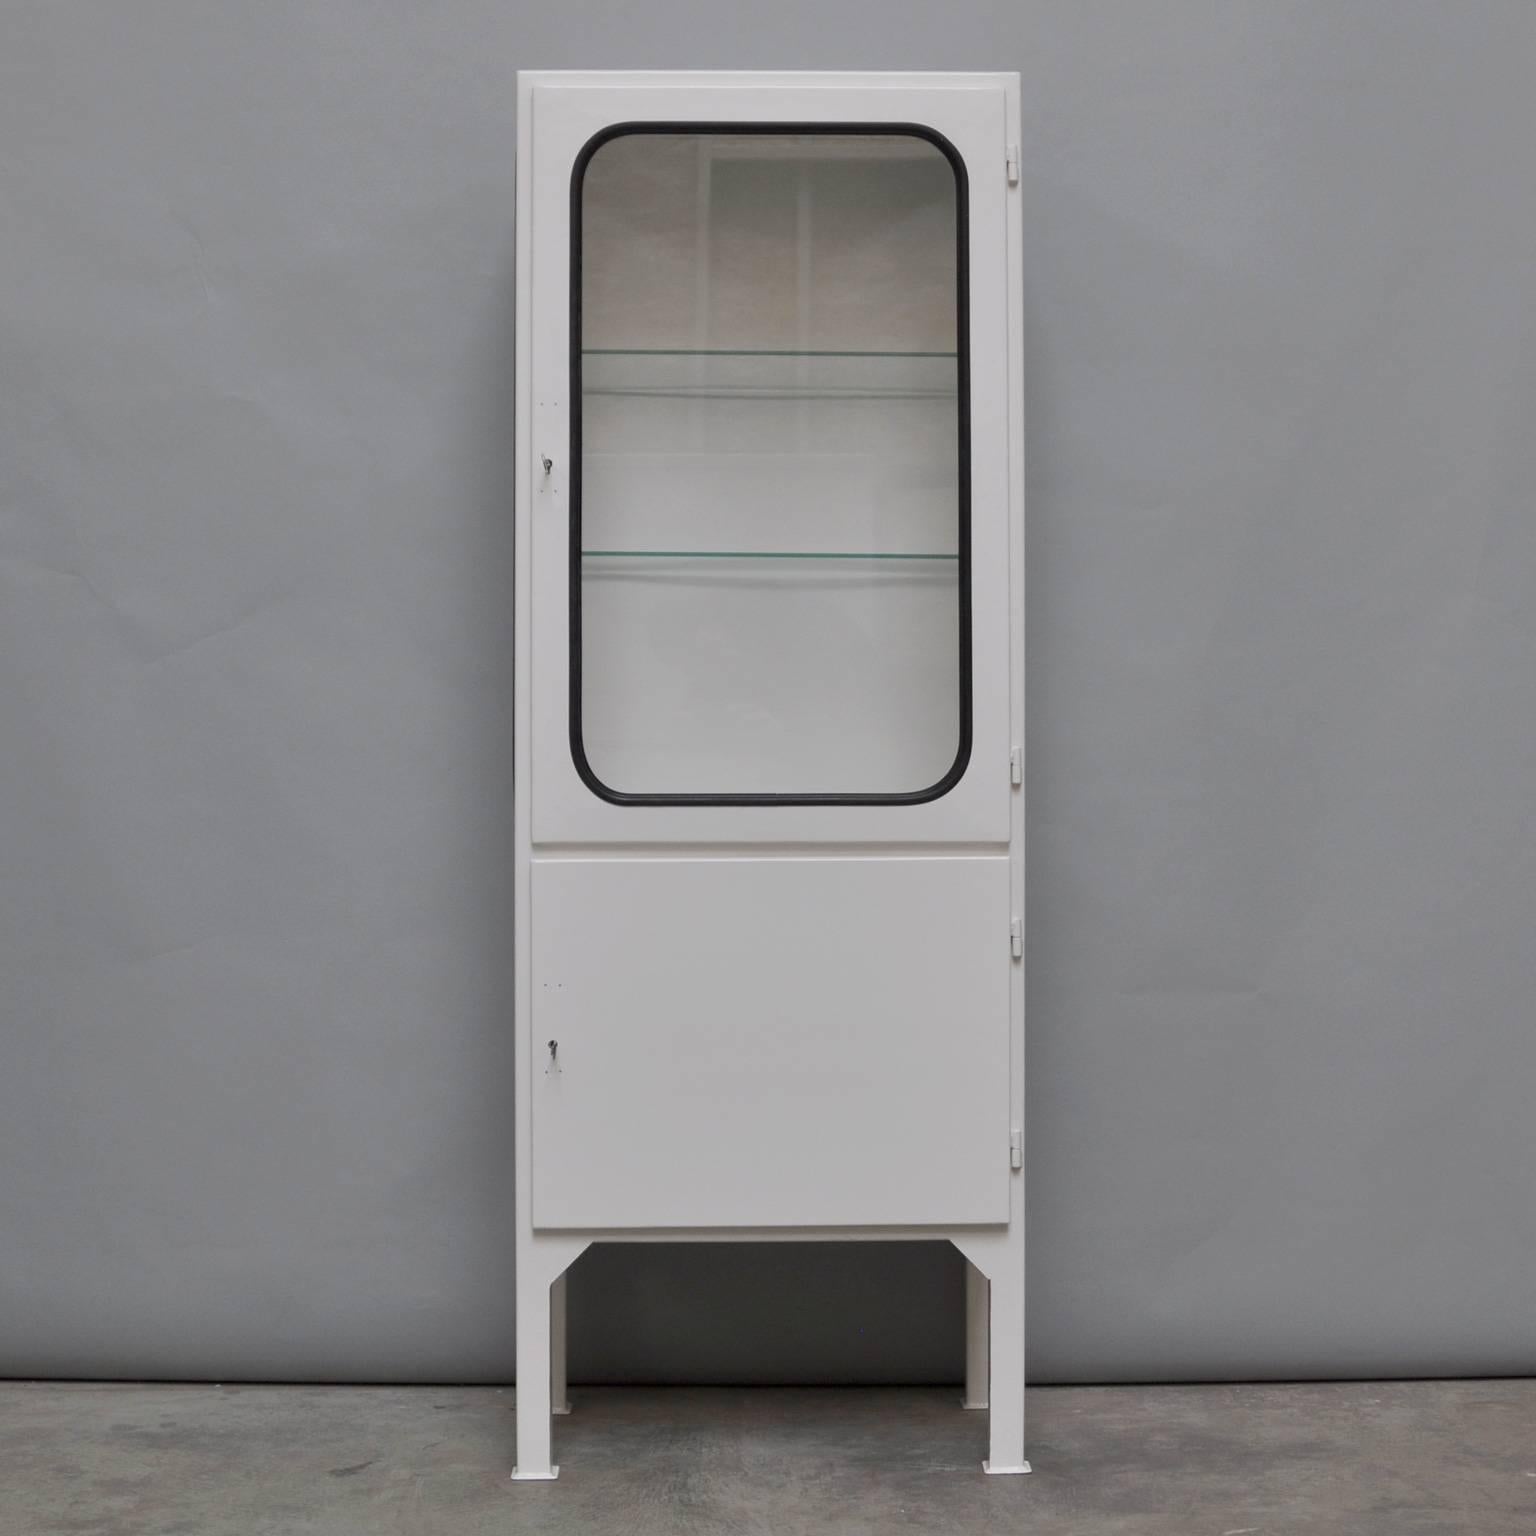 This medicine cabinet was designed in the 1970s and produced, circa 1975 in Hungary. It is made of steel and glass. The glass is held by a black rubber strip. The cabinet comes with two (new) adjustable glass shelves and a functioning lock. The